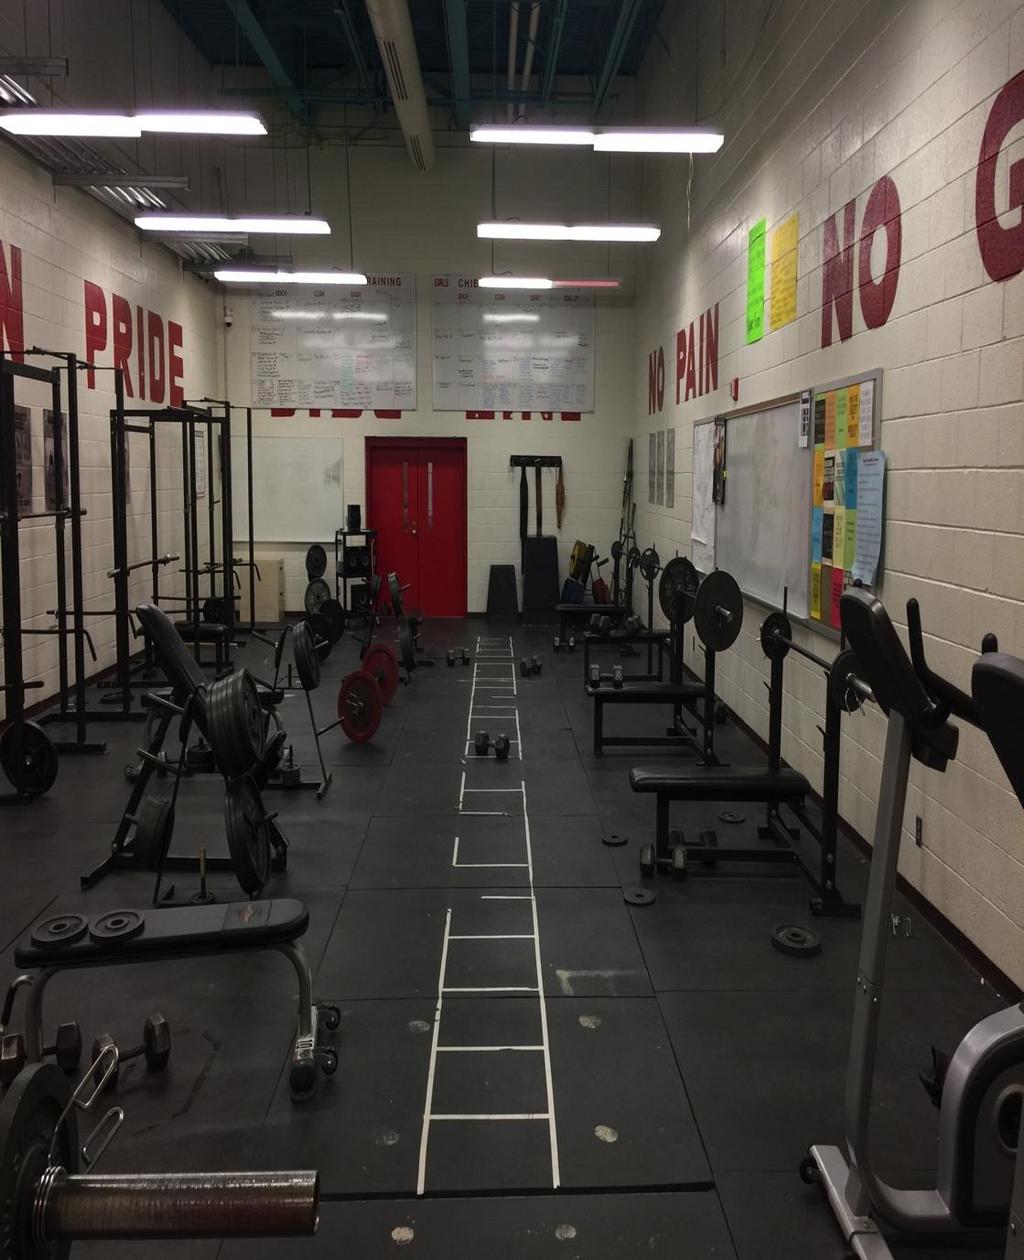 SHS Weight Room Concerns Equipment Spacing: Overall spacing of the equipment in this